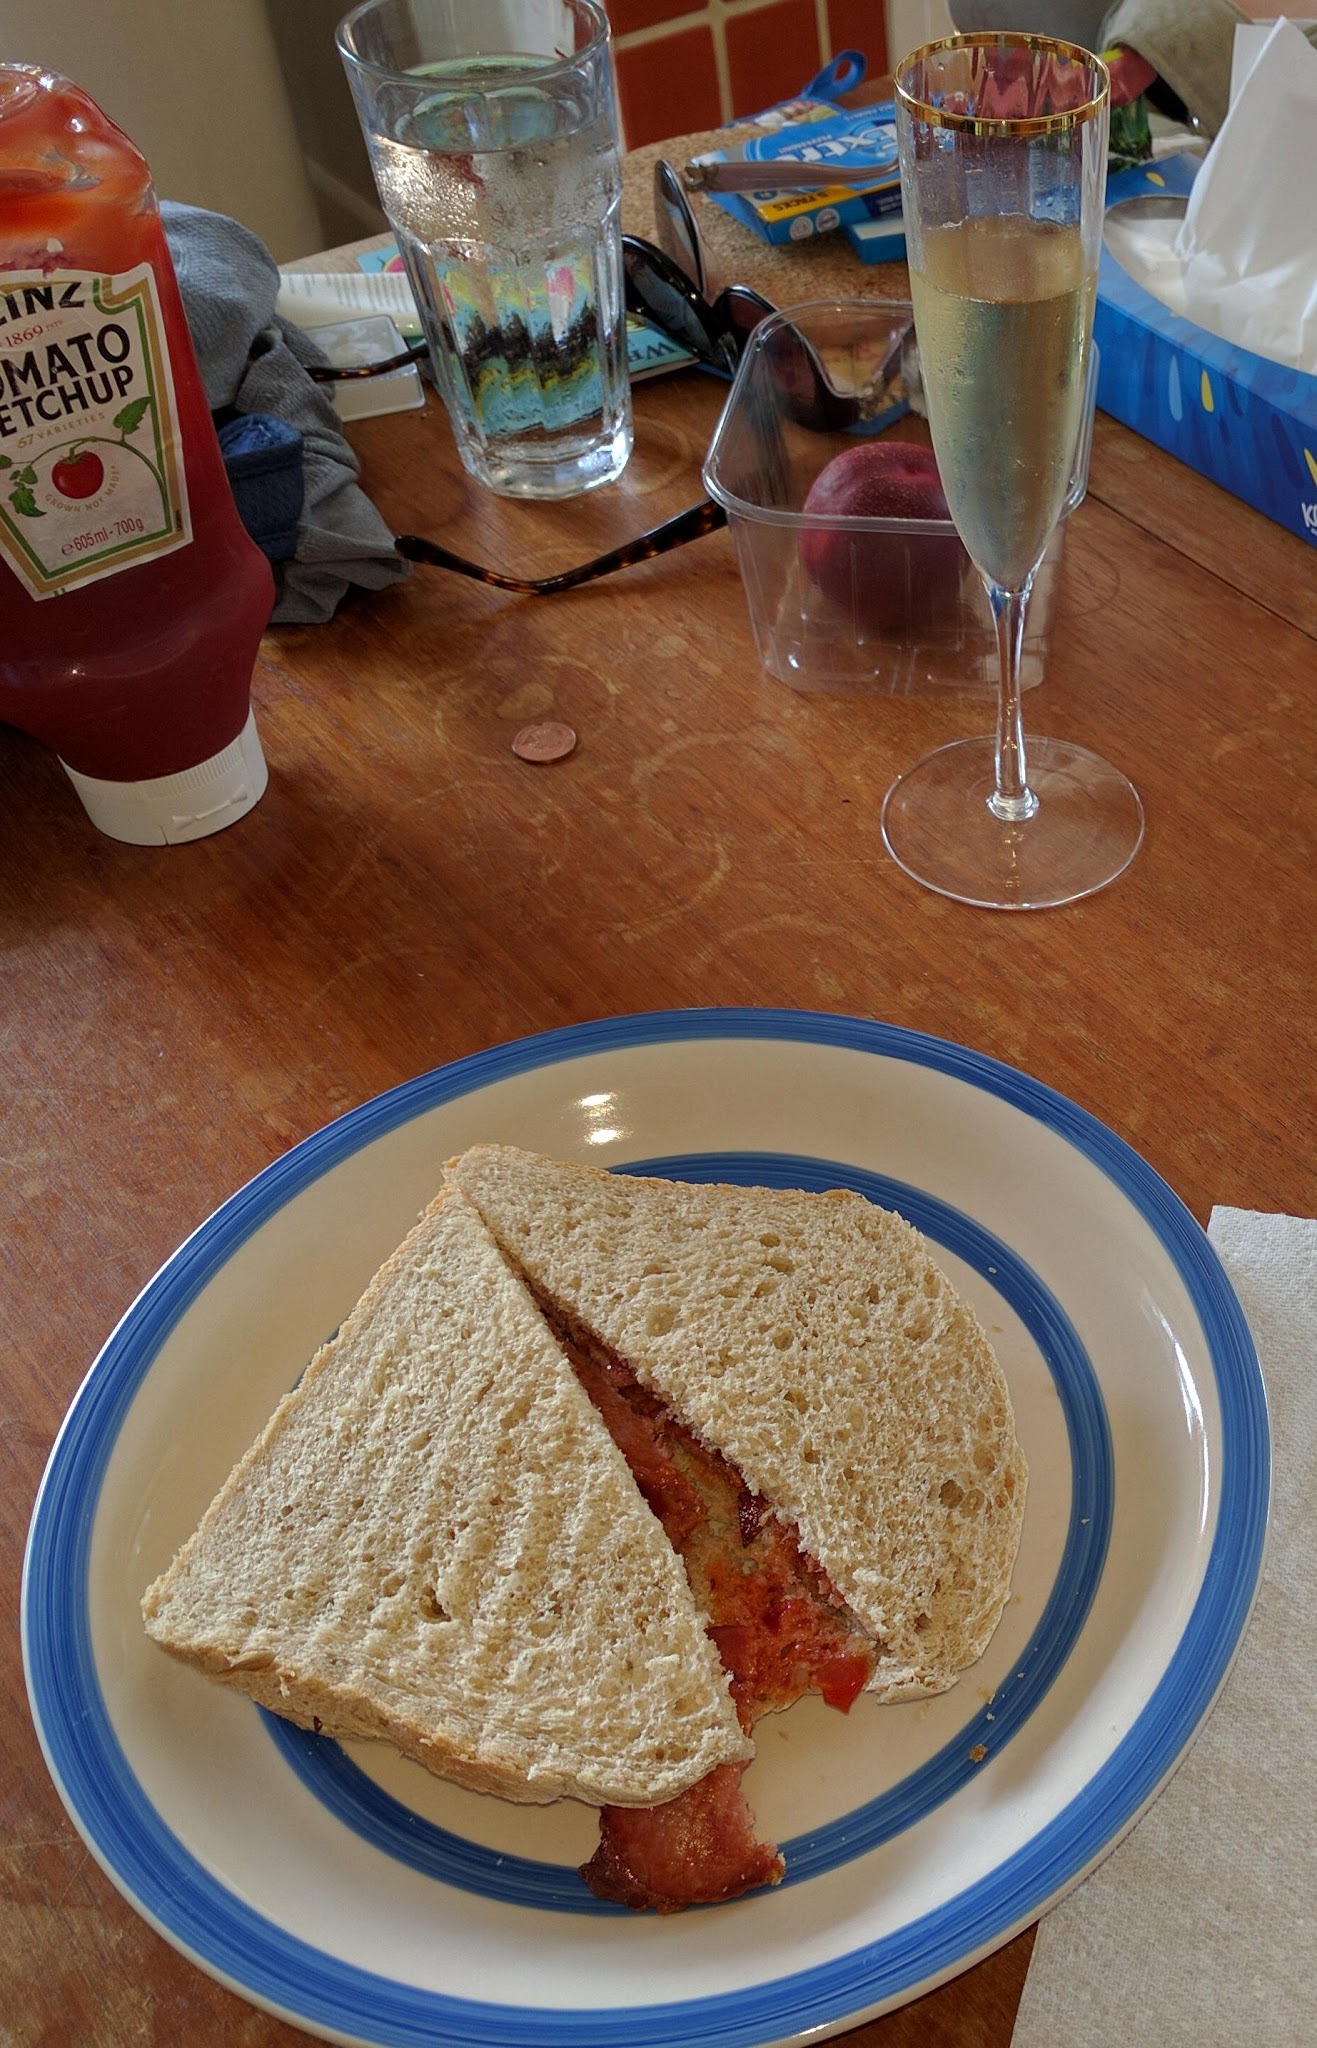 Tina's birthday. Bacon sandwich and a glass of Champagne. That's mah girl!